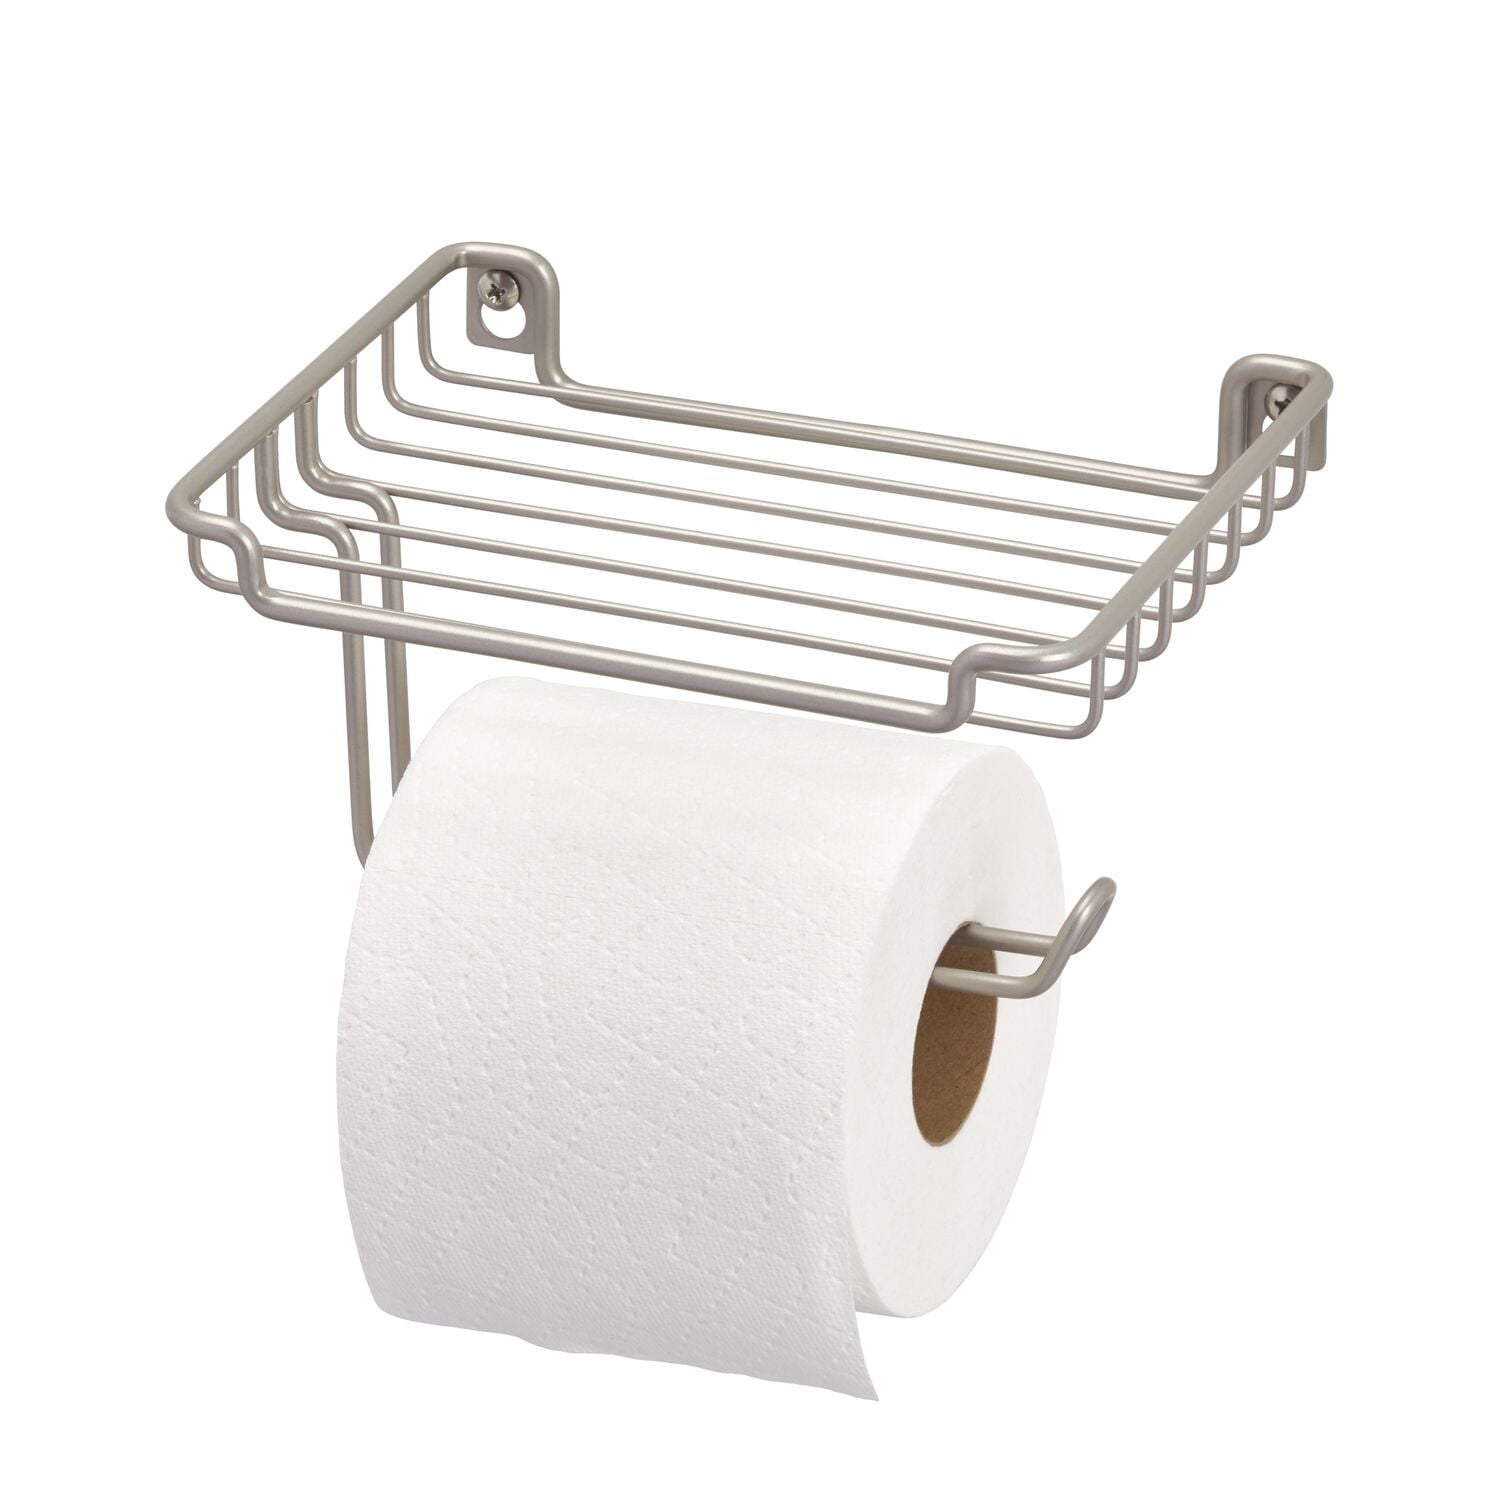 Alpine Industries Chrome Double Roll Toilet Paper Holder with Shelf 